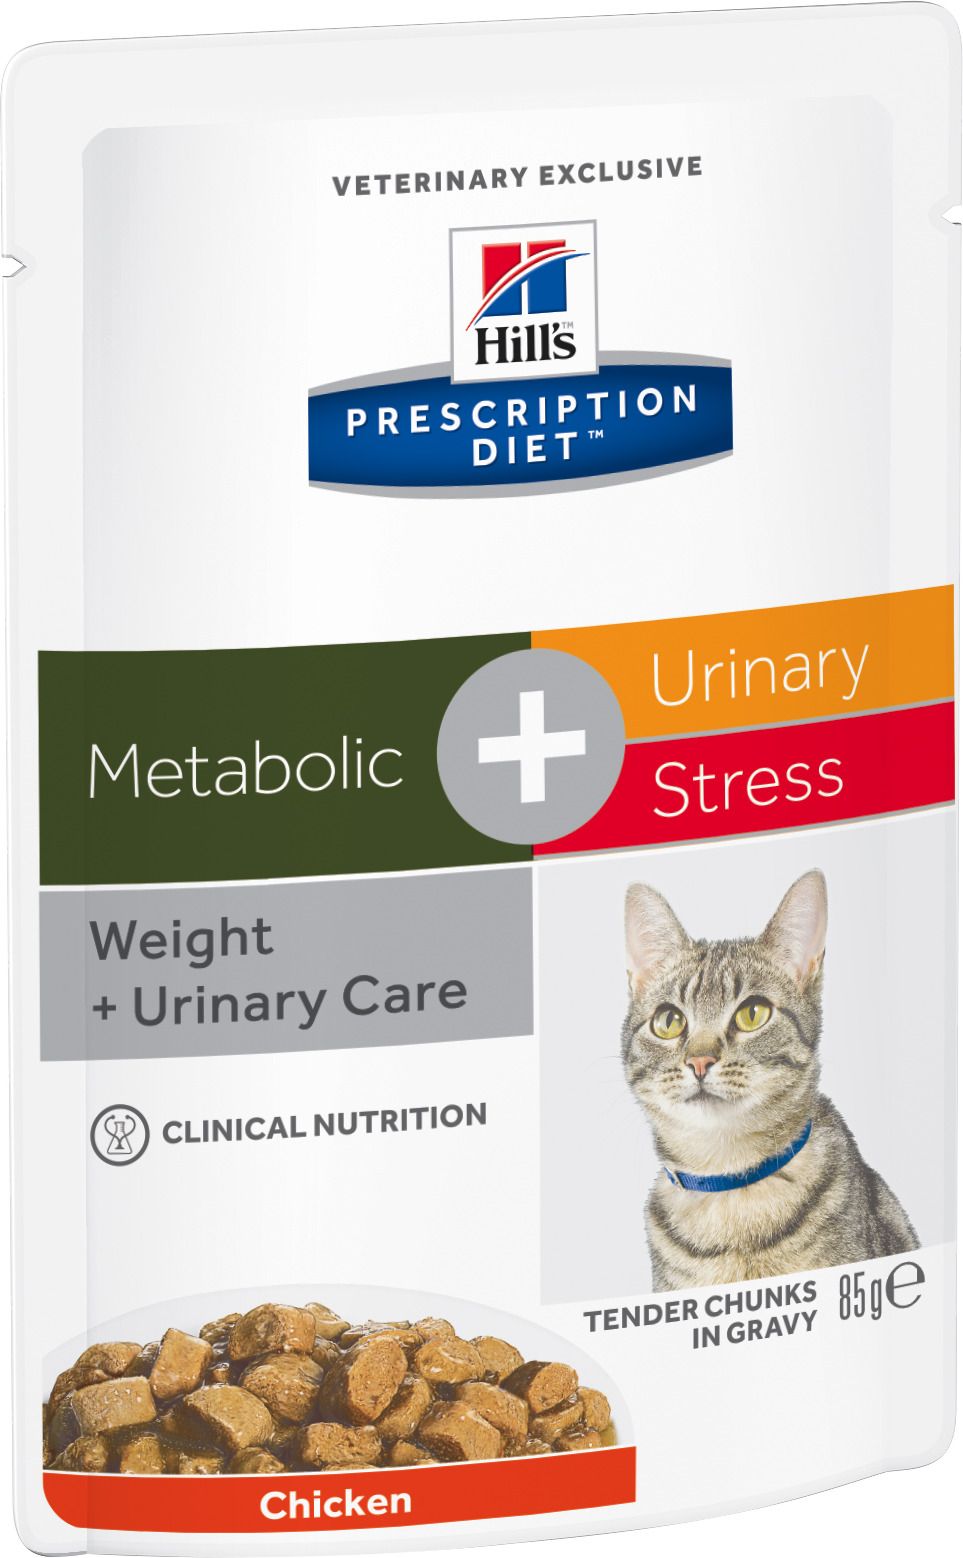   Hill's Prescription Diet Metabolic+Urinary Weight+Urinary Care          ,  , 85 